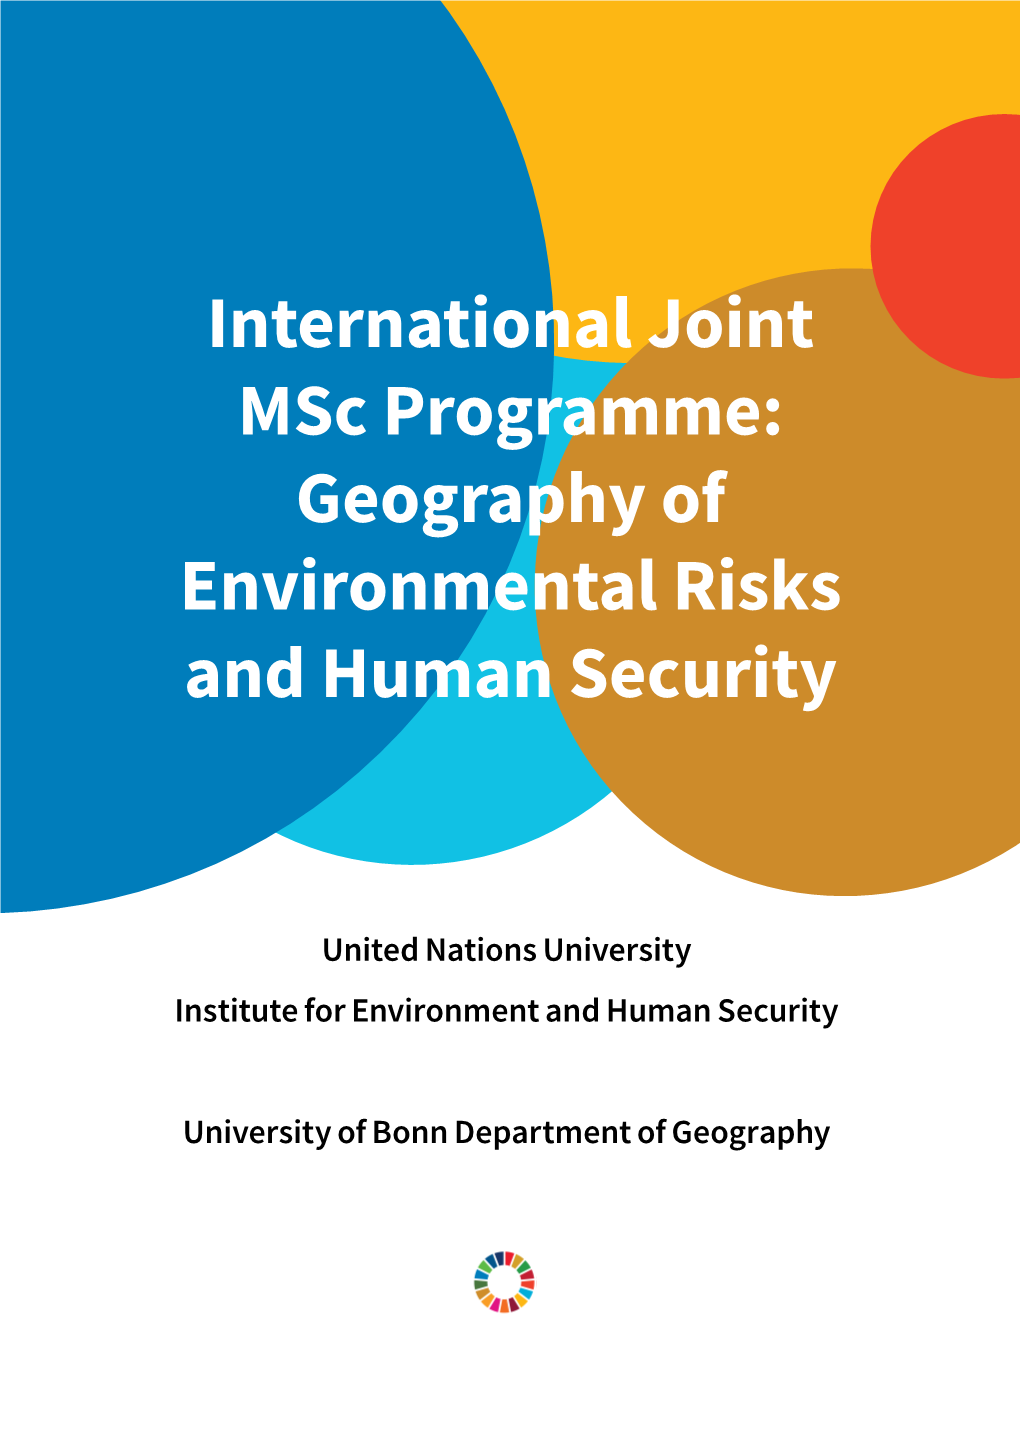 International Joint Msc Programme: Geography of Environmental Risks and Human Security